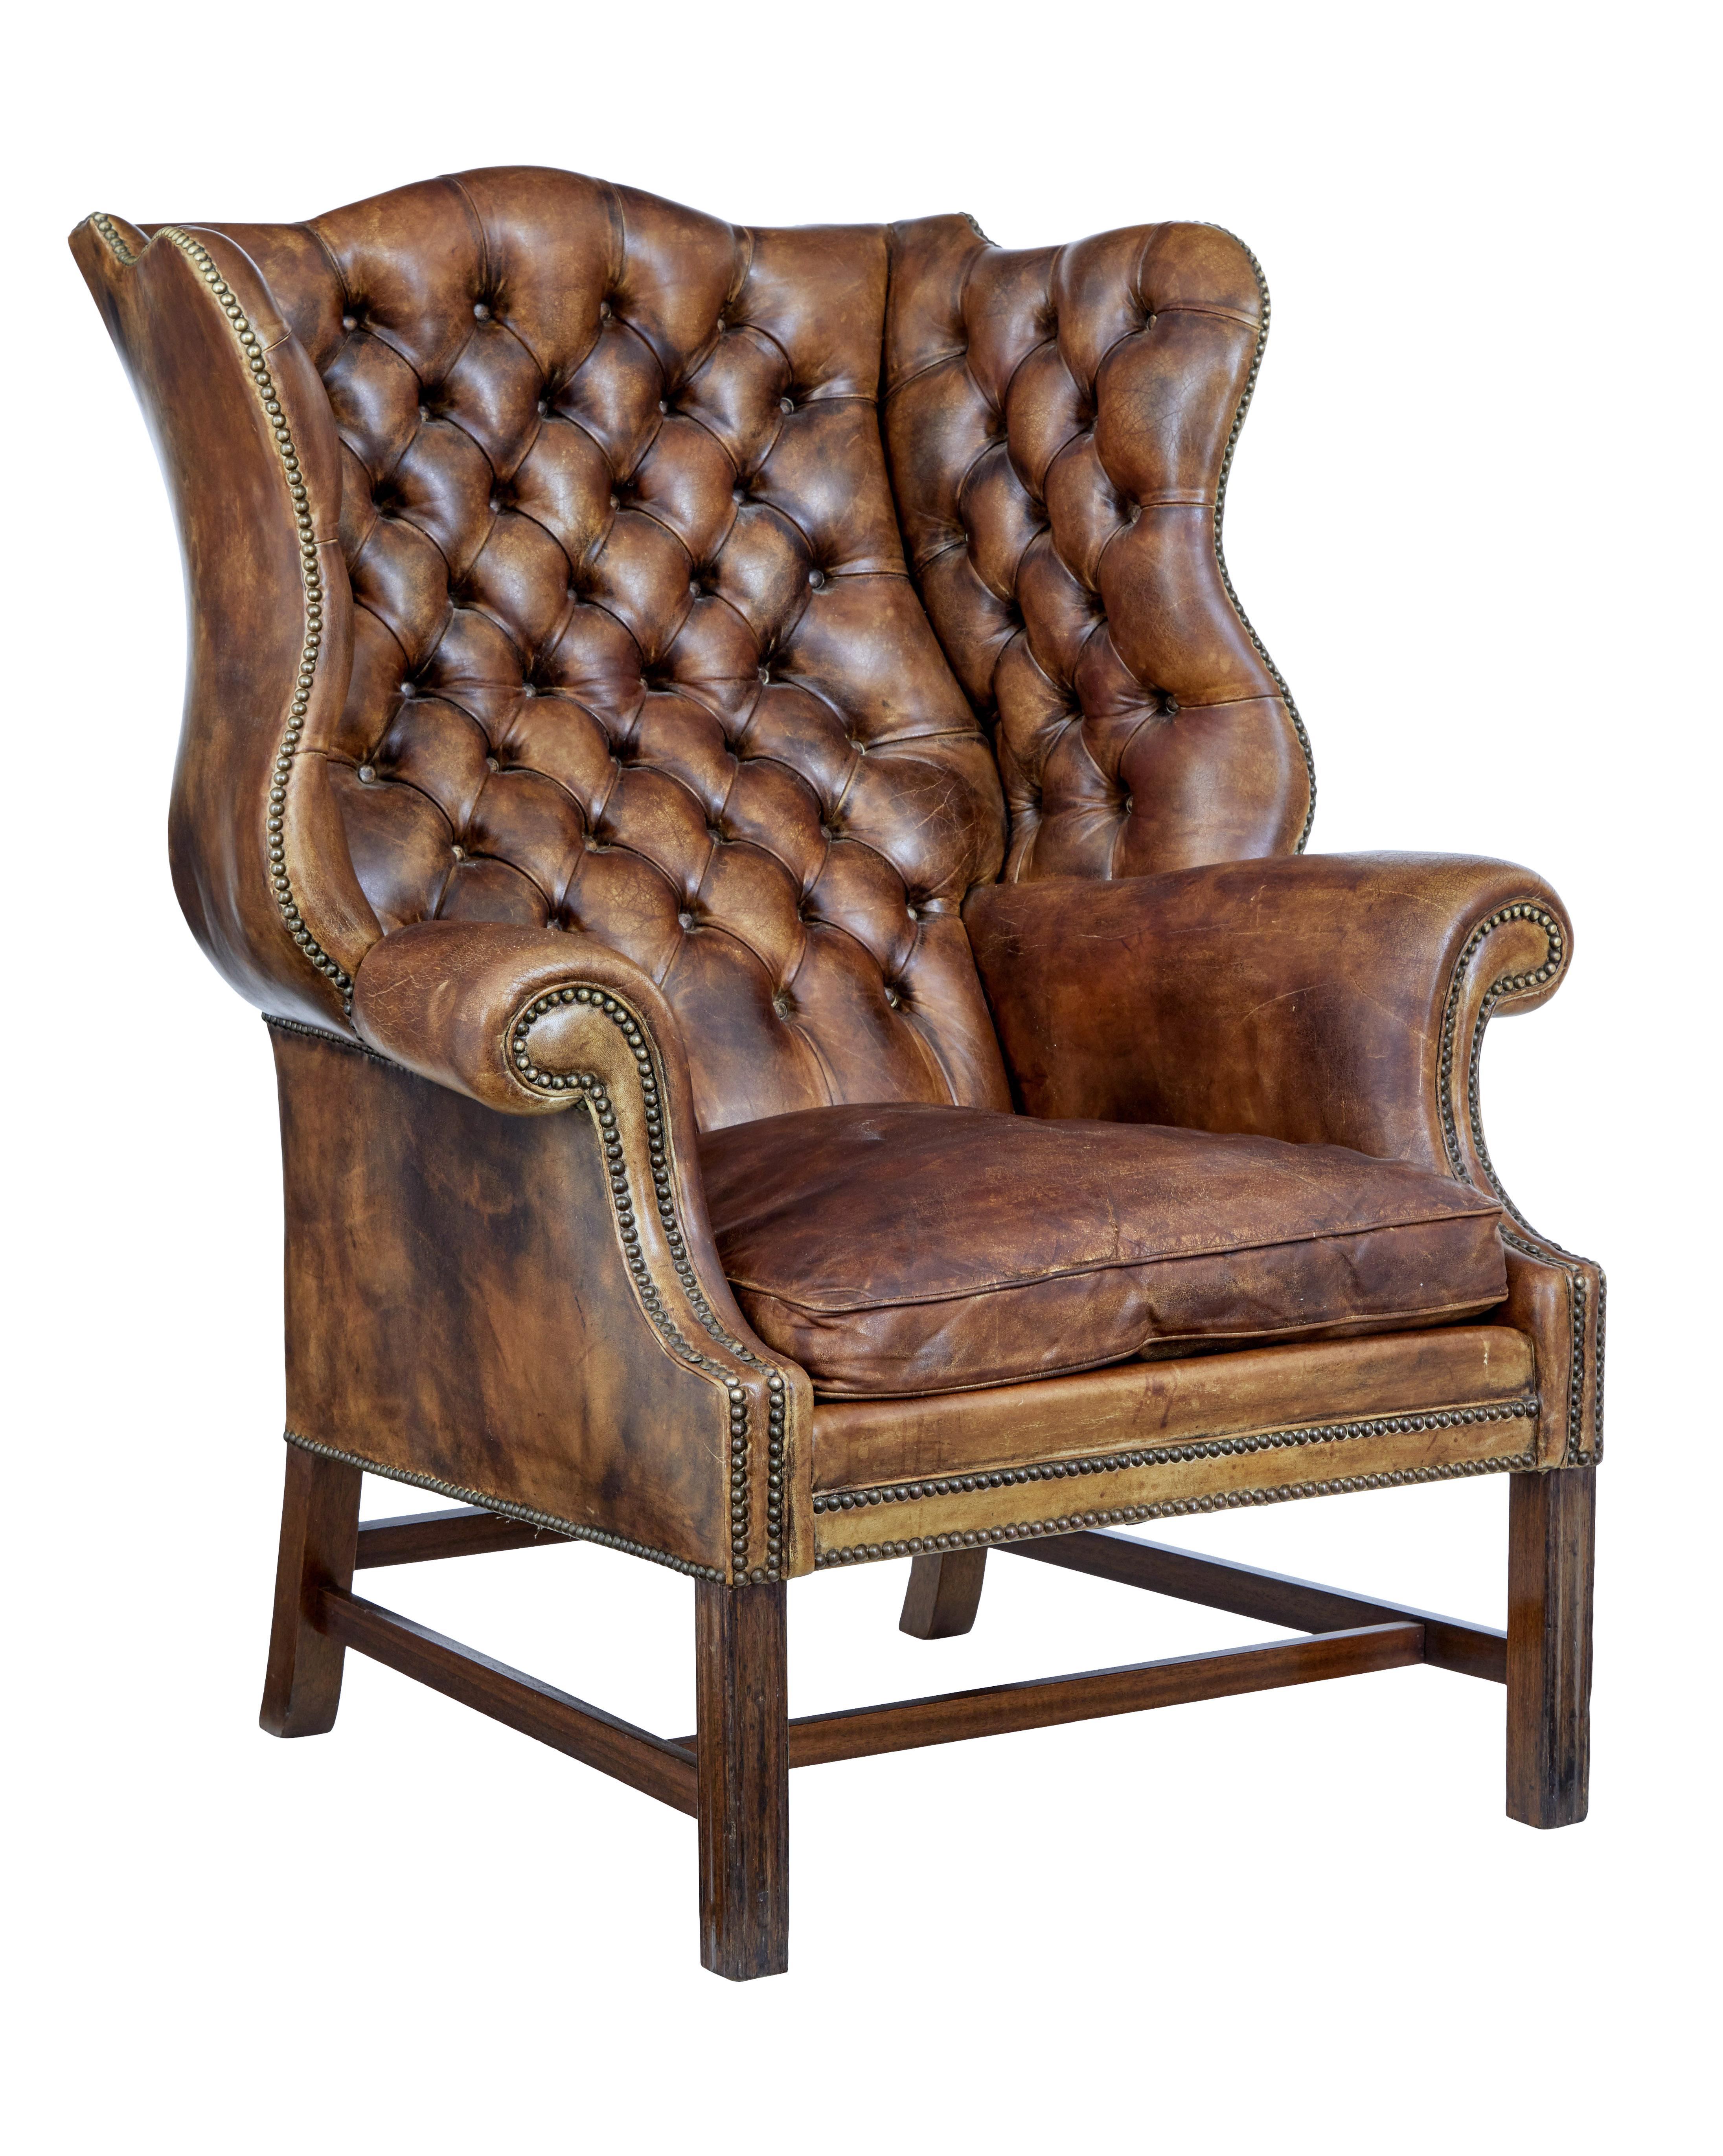 Early 20th century Edwardian button back leather wing back armchair circa 1905.

Substantial piece of opulent comfort from the early 20th century. Beautifully upholstered in brown leather. Shaped back with deep wing back head rests. Decorated with